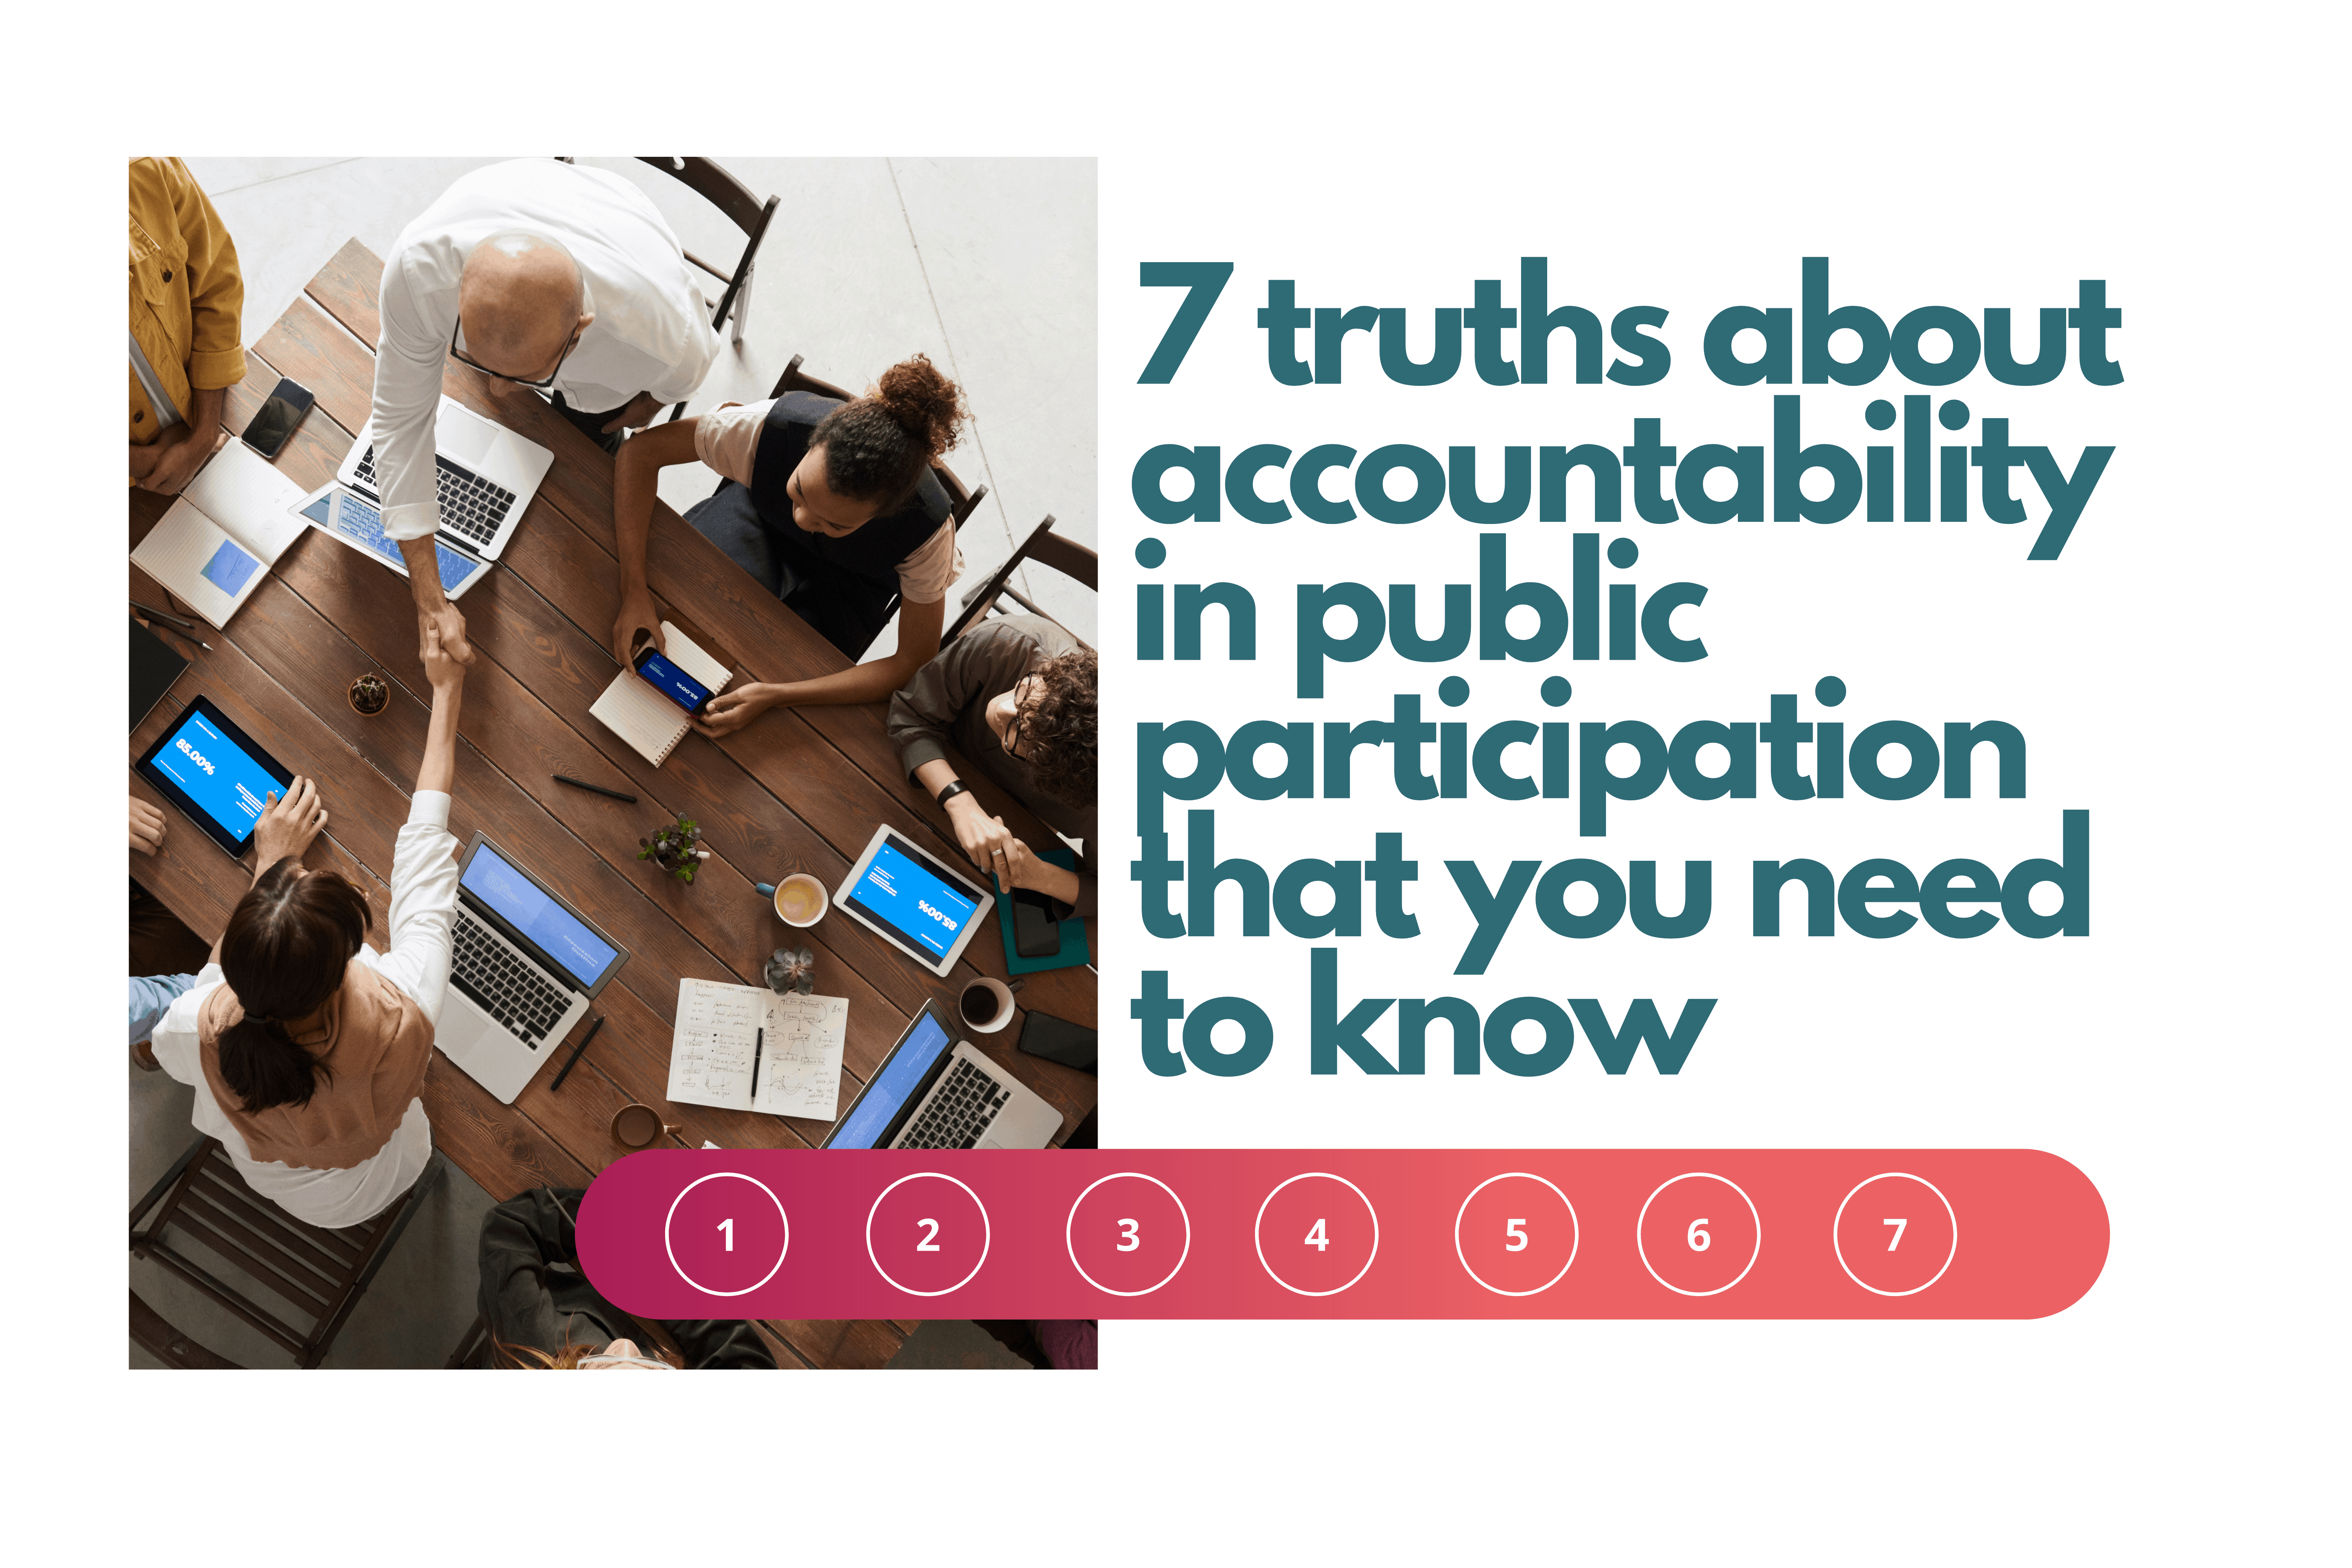 7 truths about accountability in public participation that you need to know